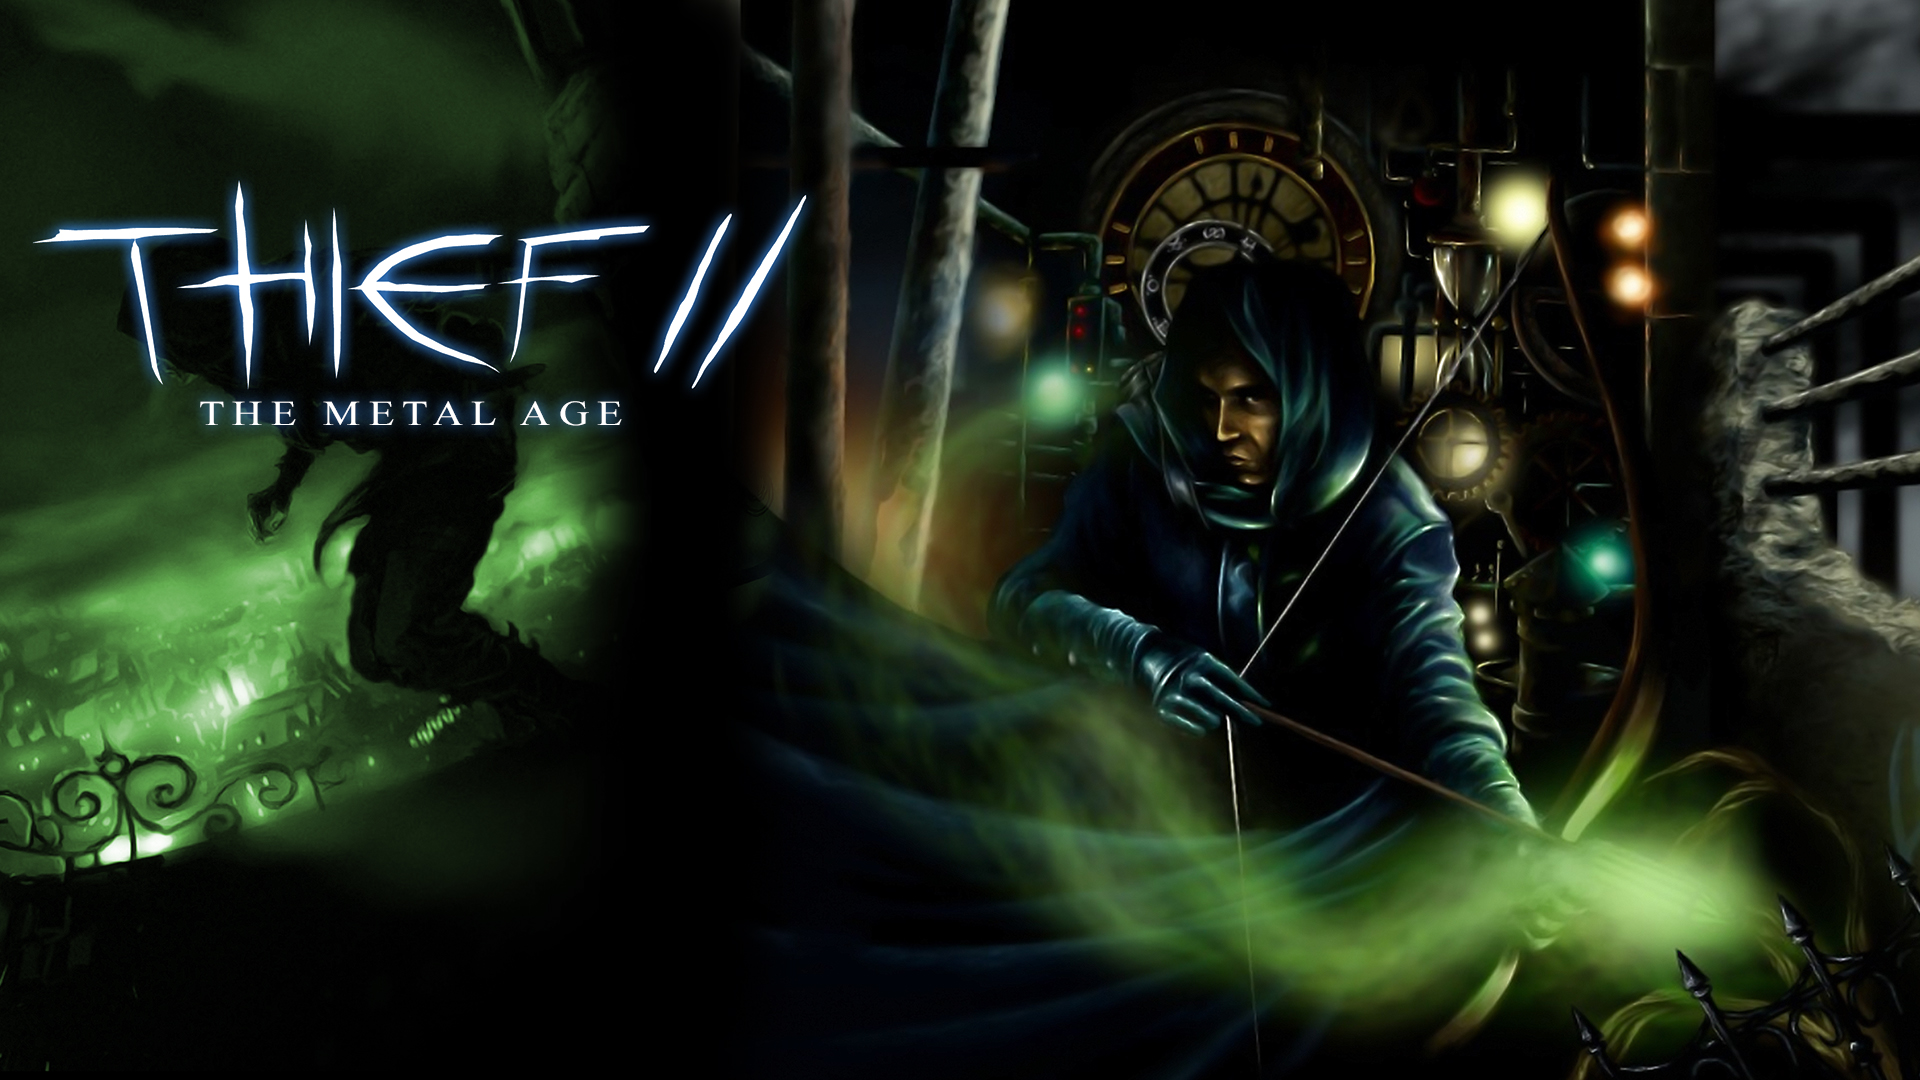 Thief 2 HD Mod V1.0 available for download, adds new textures, effects ...